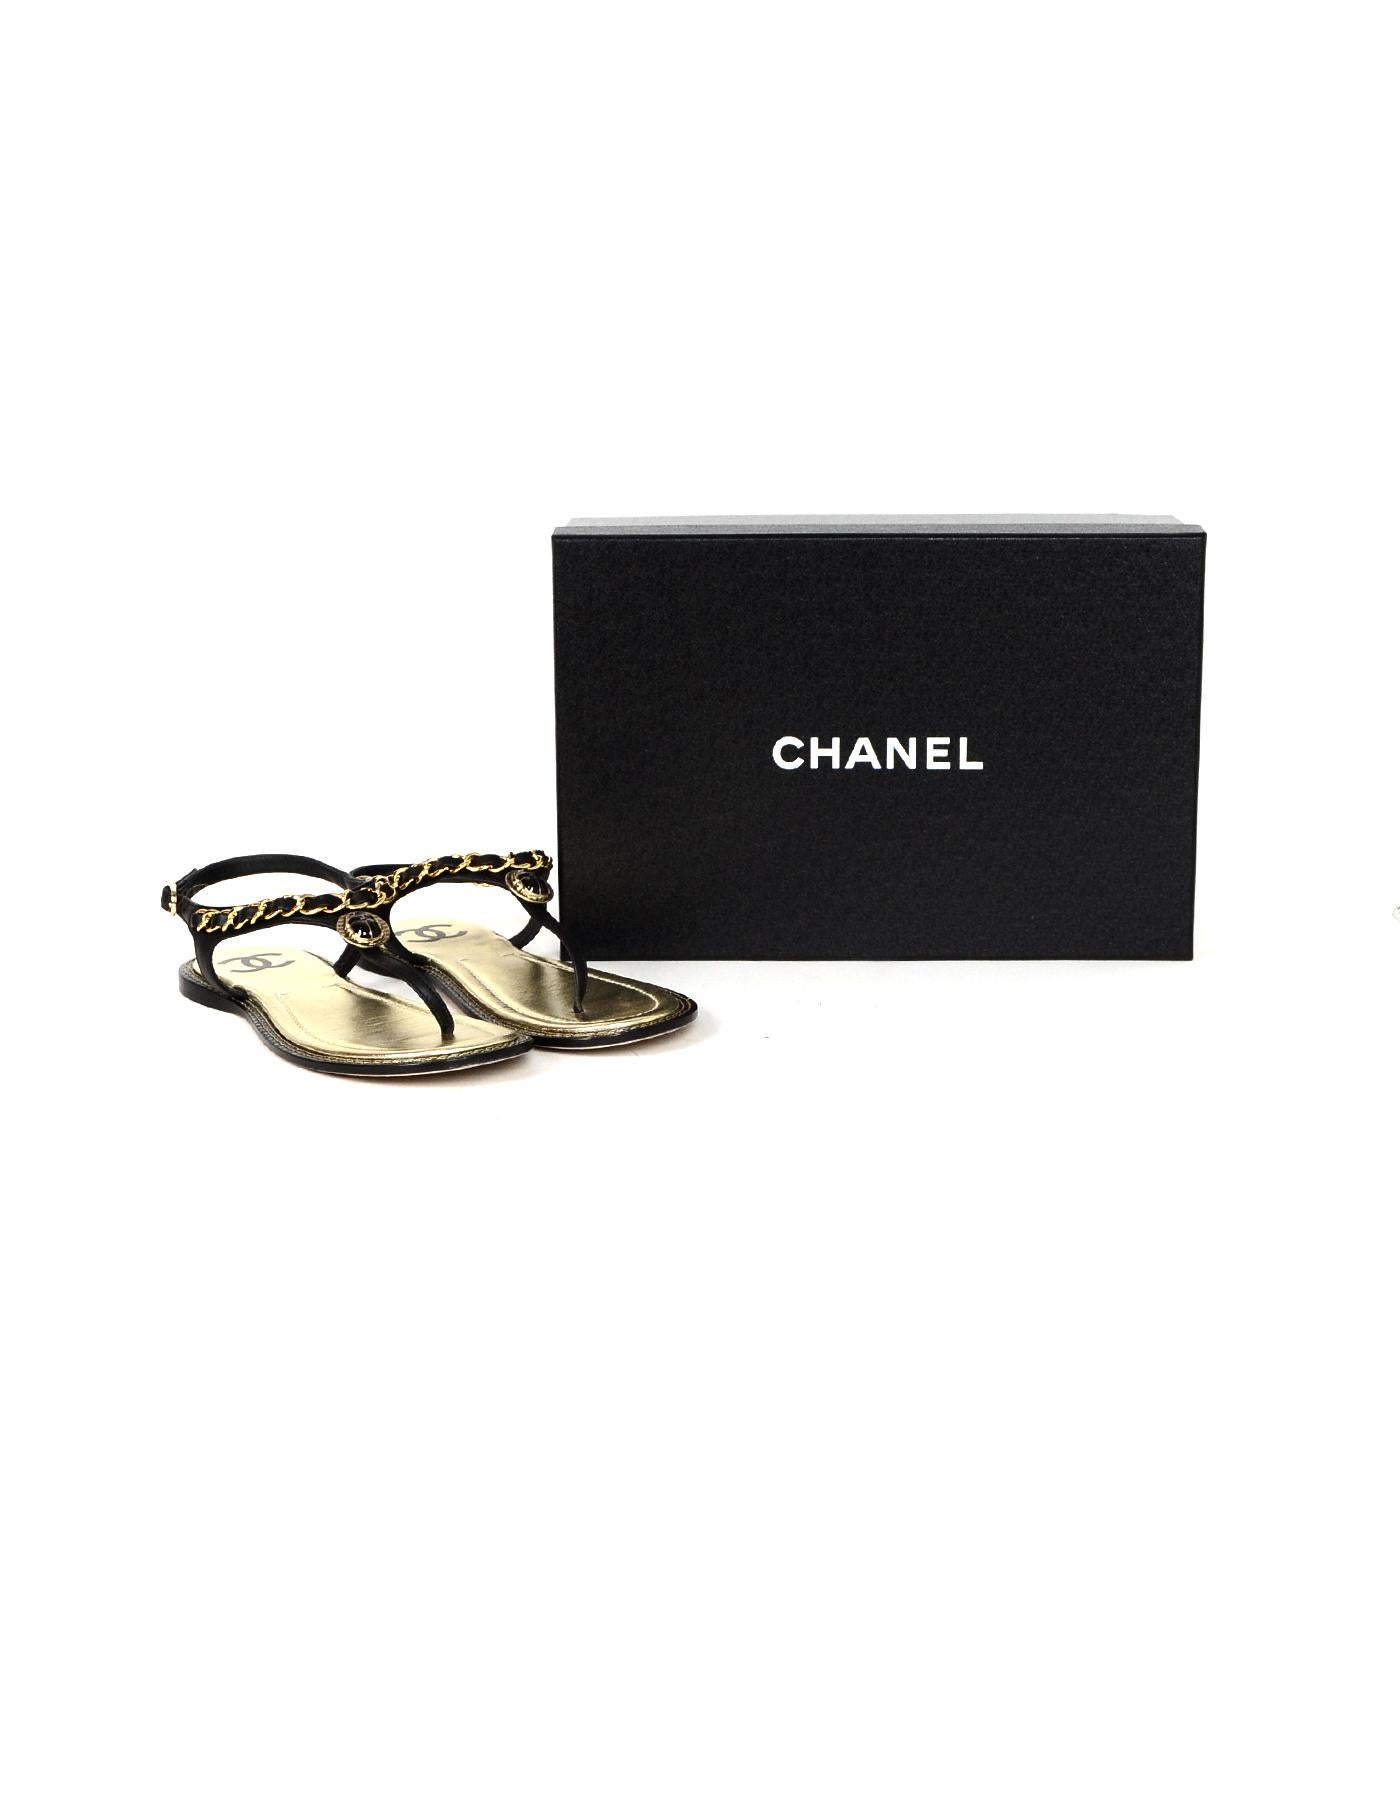 Chanel 2019 Black Leather Laced Chain Sandals w/ CC sz 38 rt. $925 1